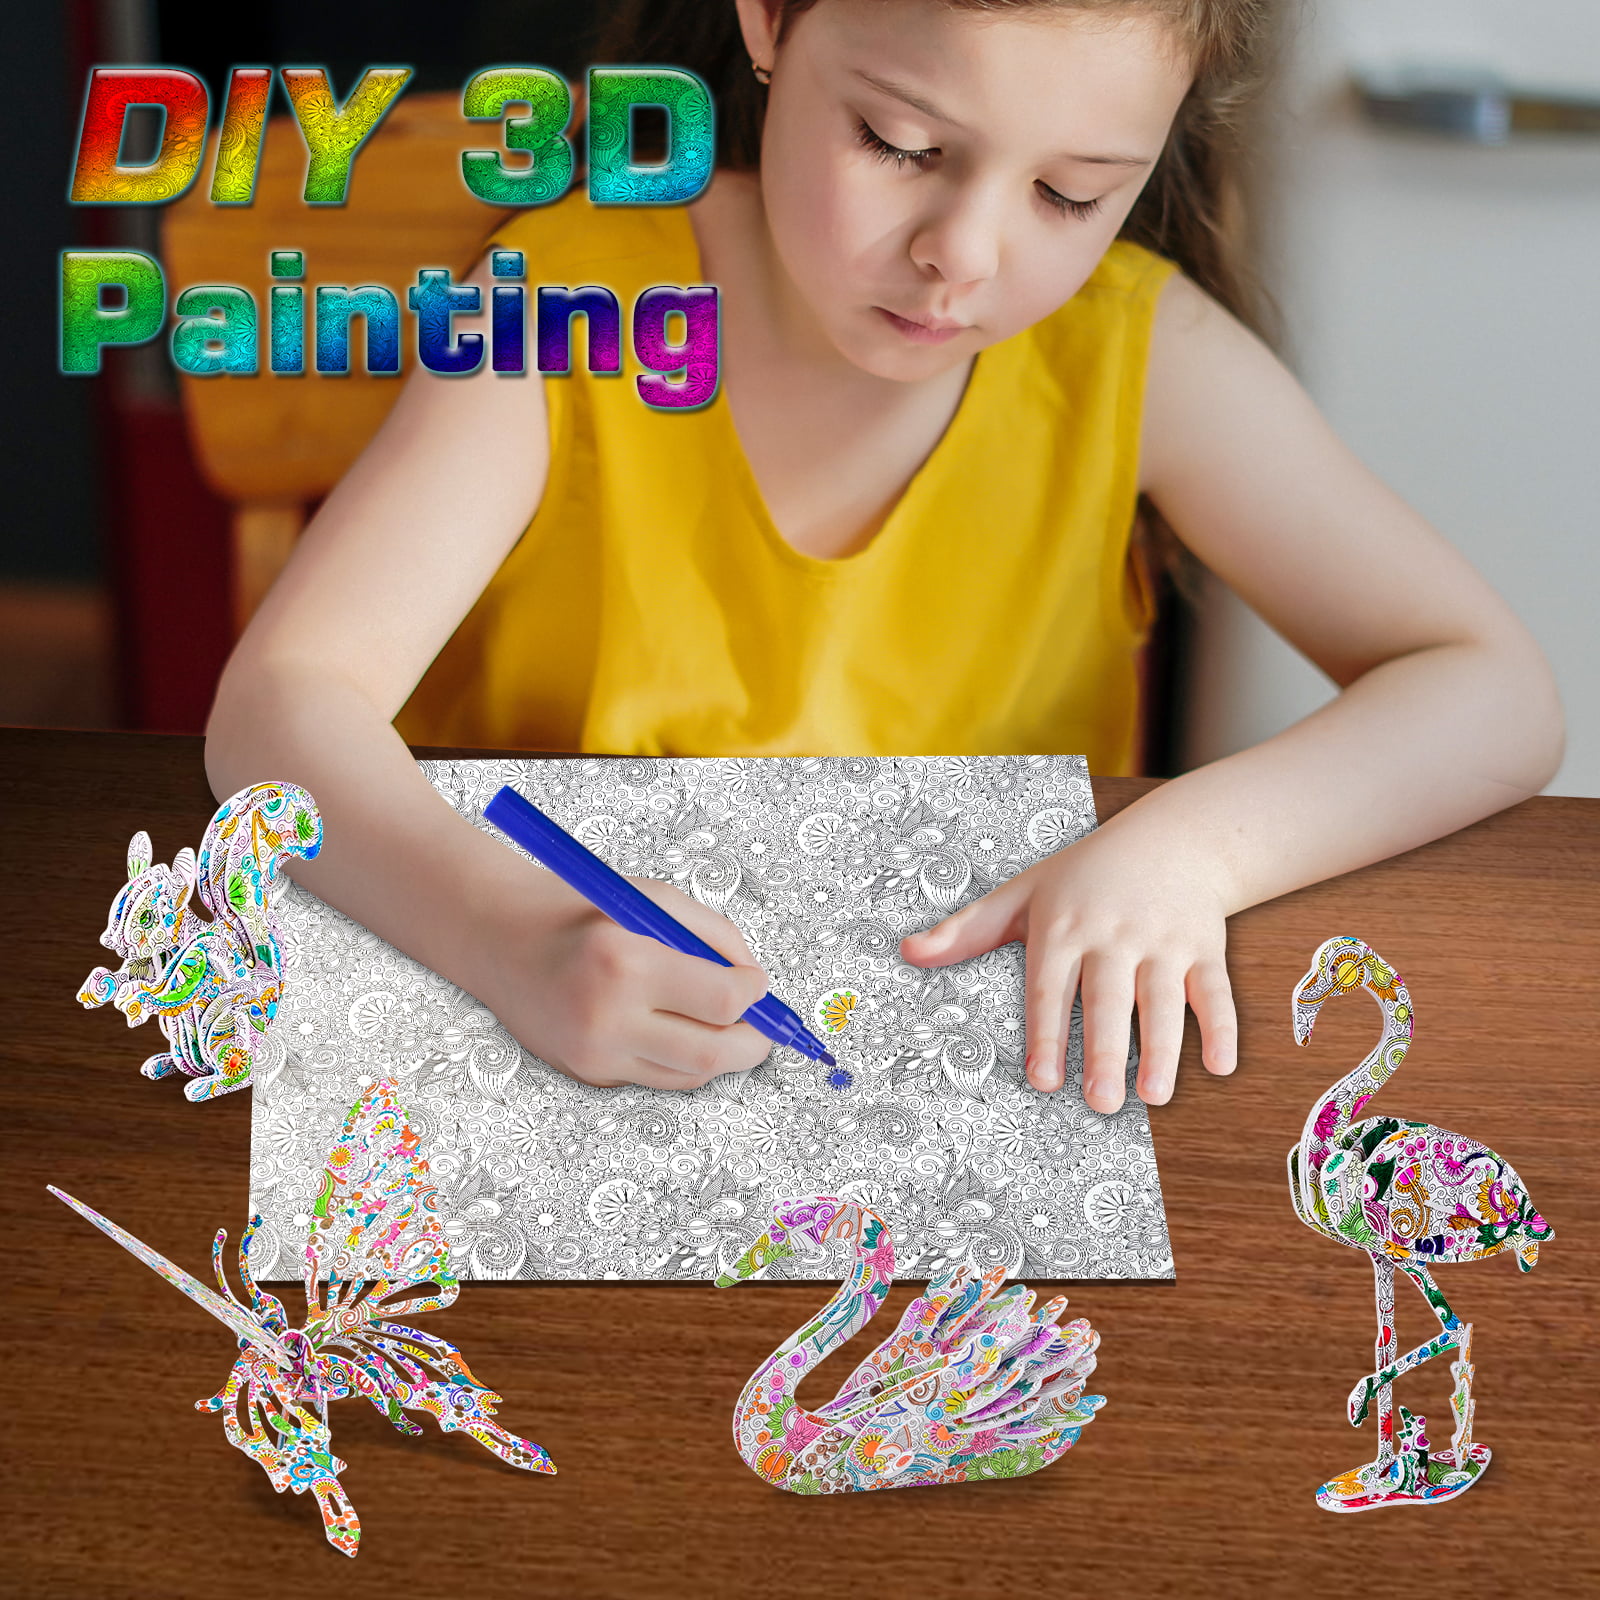 Sunnypig Drawing Set for 8 Year Old Kid Guitar Painting Kit for 6 Year Old Boy Girl DIY 3D Coloring Puzzle Art and Craft Toy for 10 11 12 Year Old